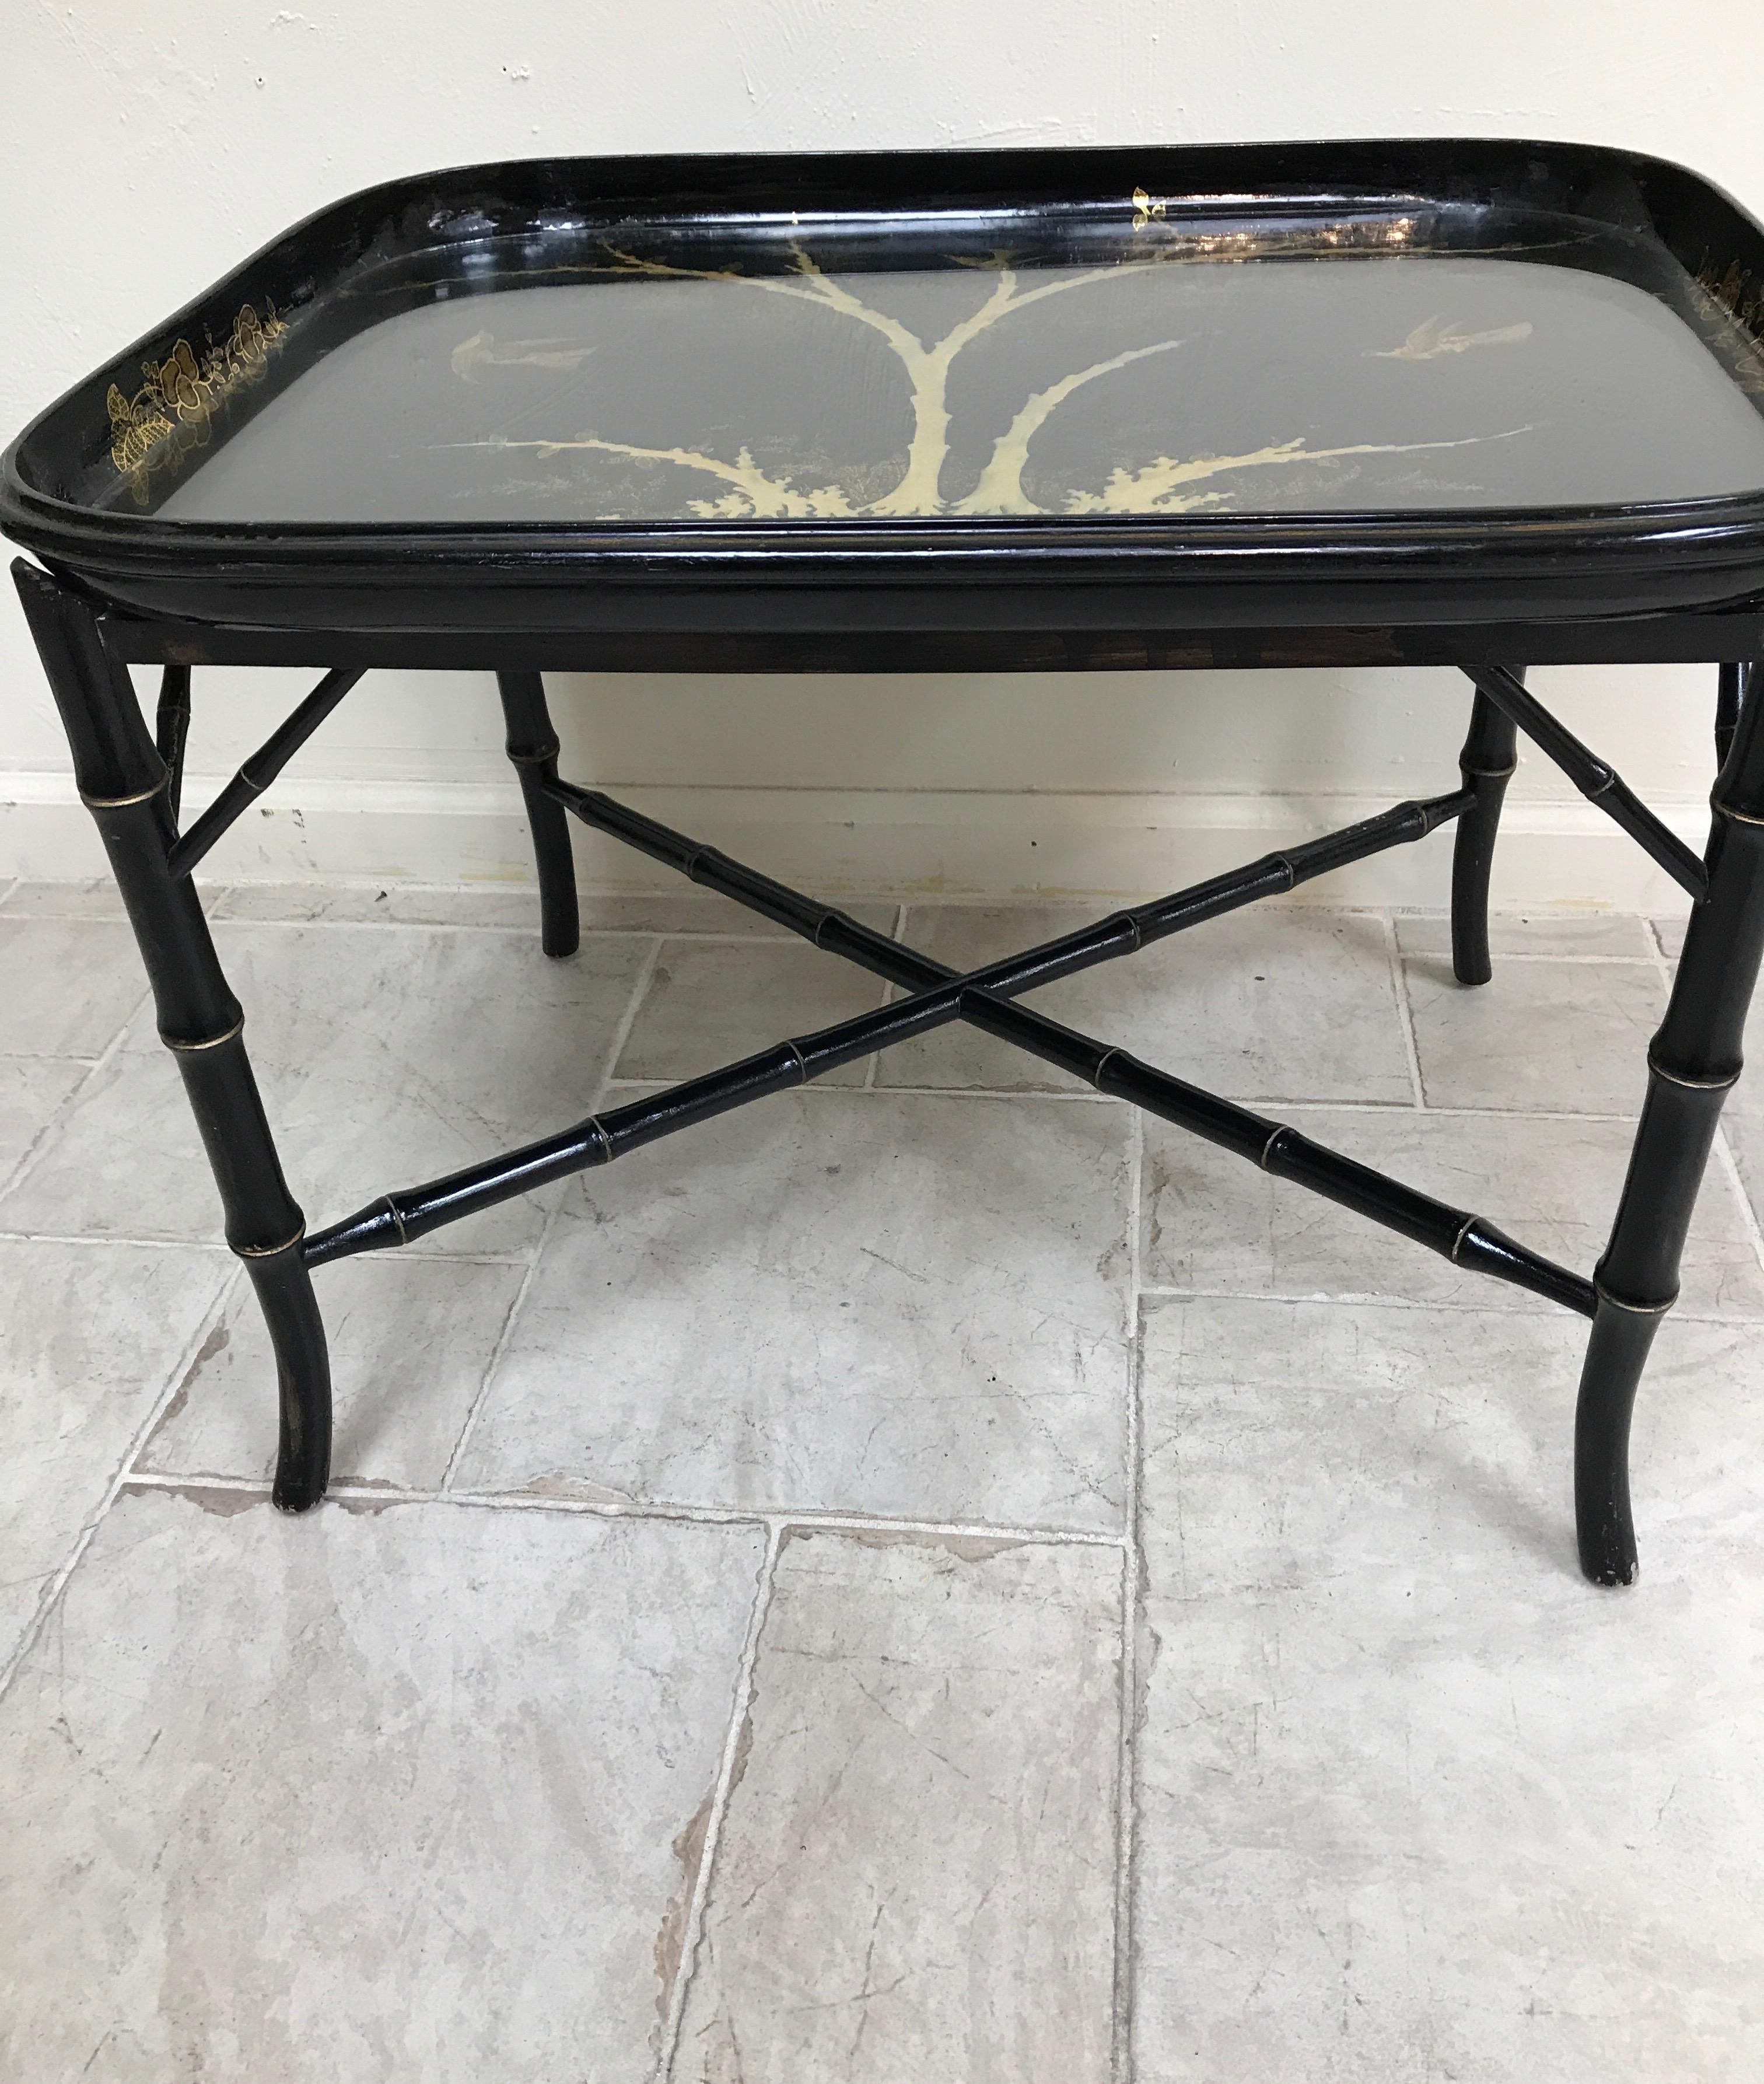 Antique paper mâché tray table in black and gold. Base is a black painted faux bamboo. Tray has a protective glass covering the gilded tree and bird design.